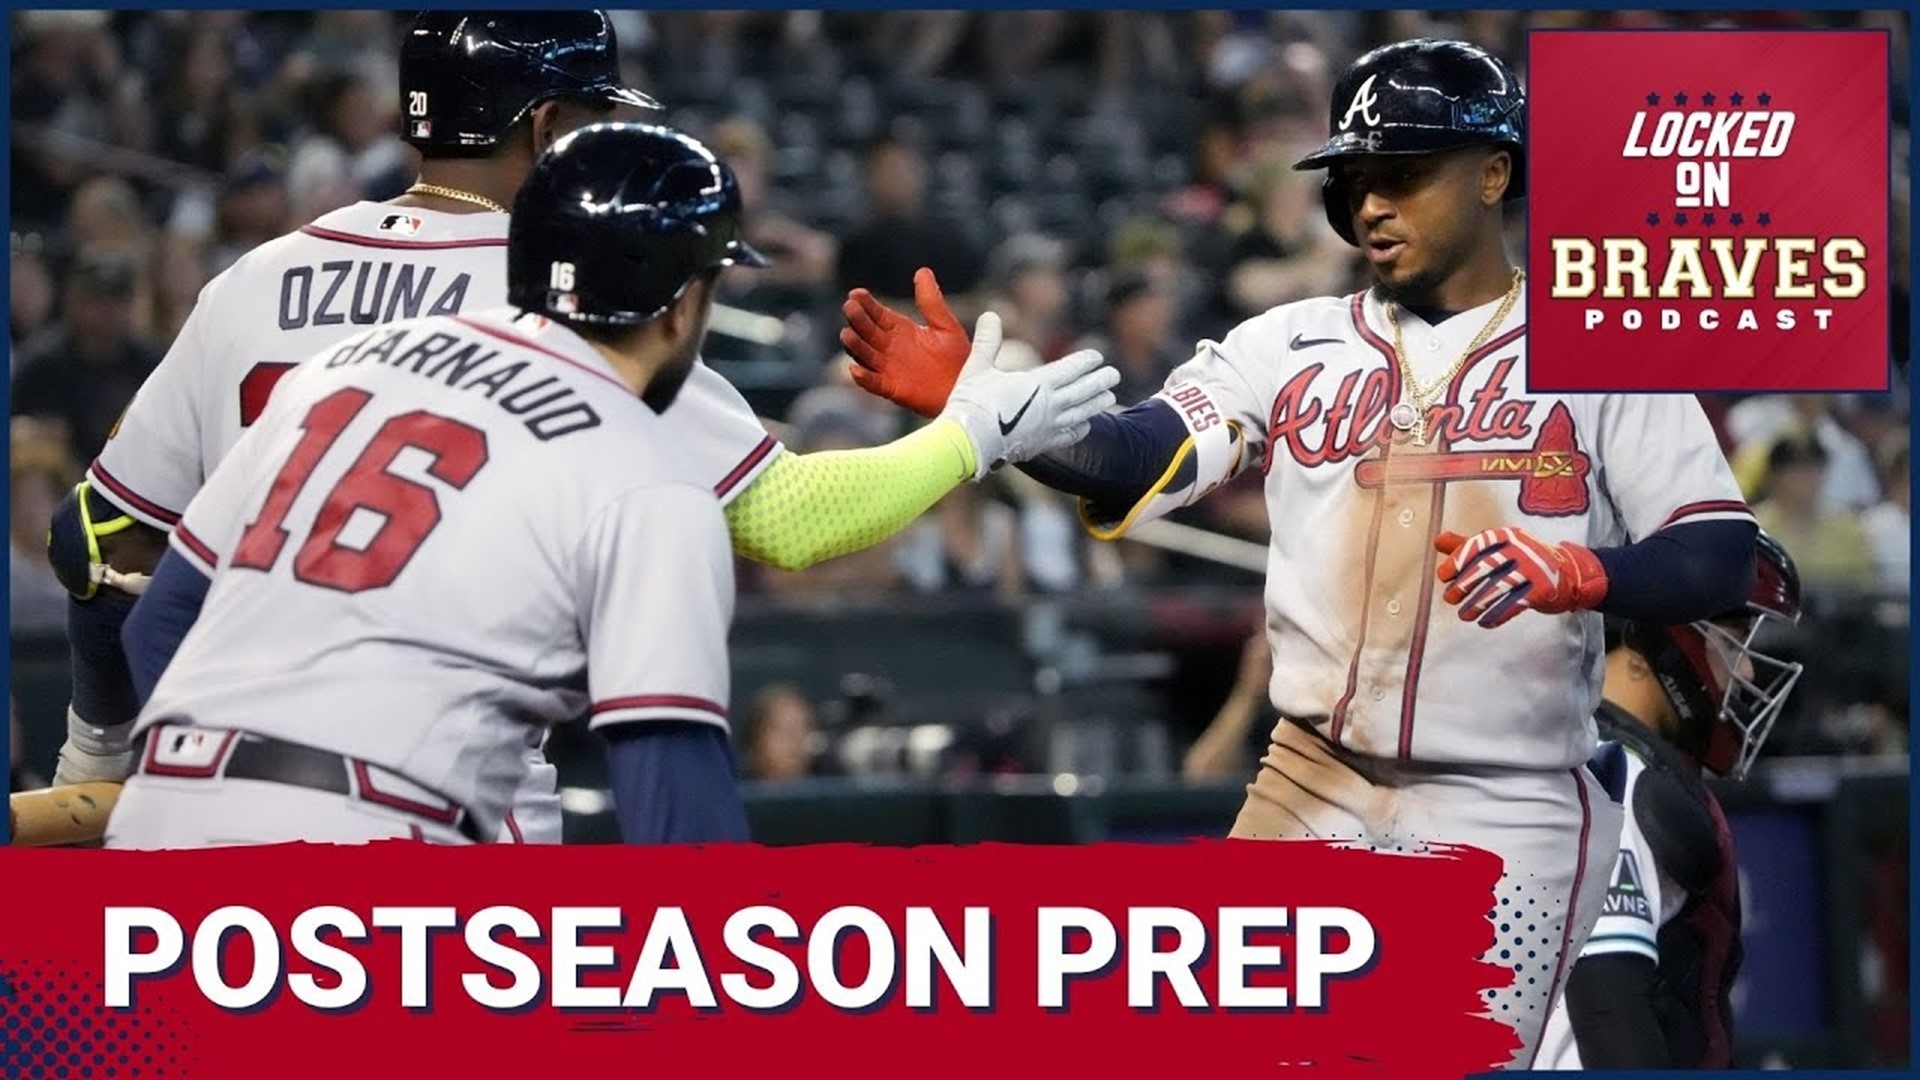 The Atlanta Braves have wrapped up the NL East and now have to decide how to handle things down the stretch.